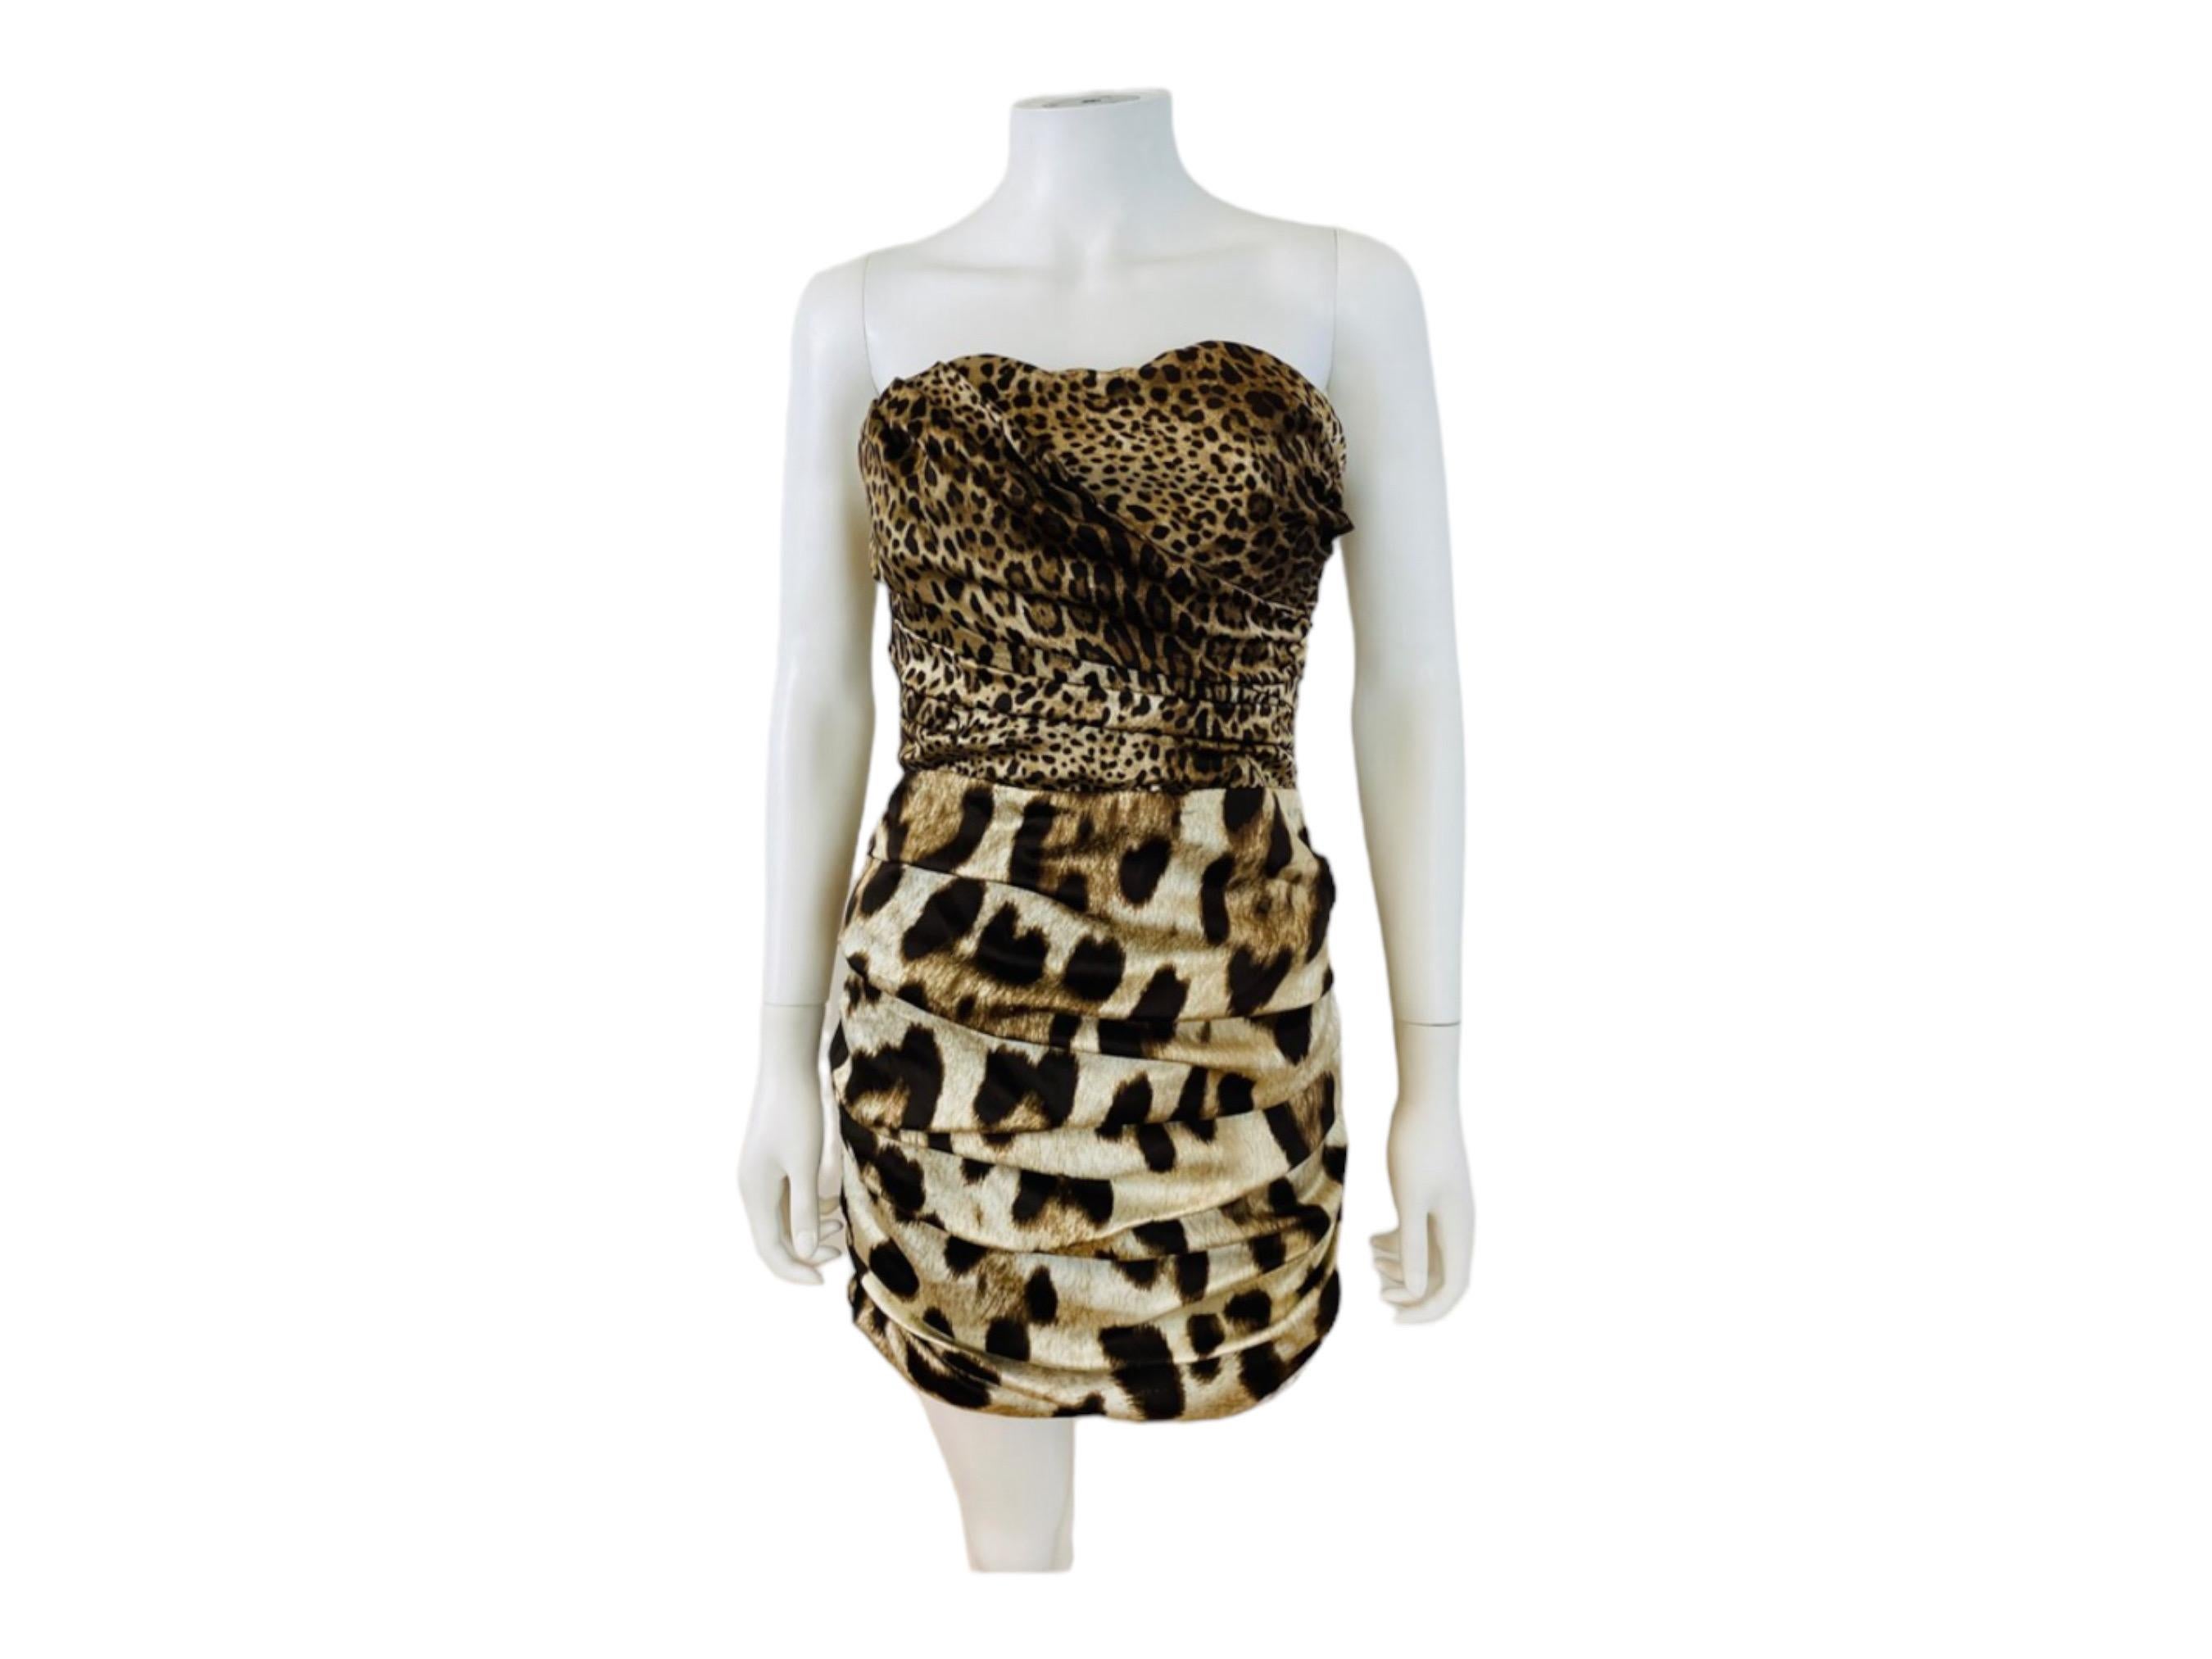 Vintage 2000s Animal Leopard Cheetah Print Dolce & Gabbana Silk Mini Dress In Excellent Condition For Sale In Denver, CO